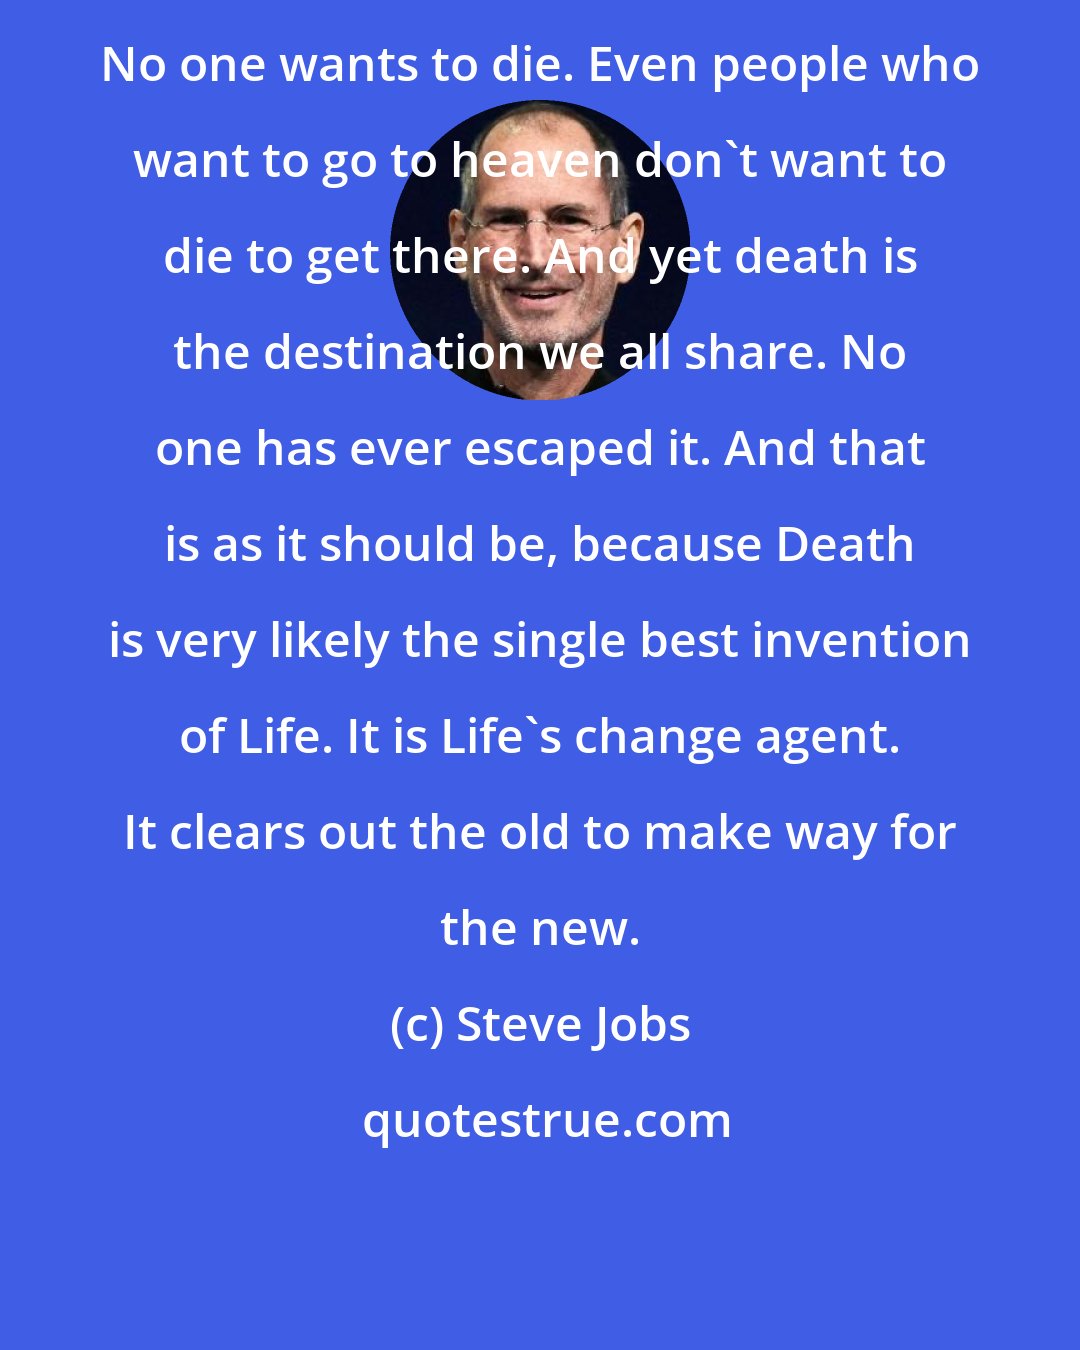 Steve Jobs: No one wants to die. Even people who want to go to heaven don't want to die to get there. And yet death is the destination we all share. No one has ever escaped it. And that is as it should be, because Death is very likely the single best invention of Life. It is Life's change agent. It clears out the old to make way for the new.